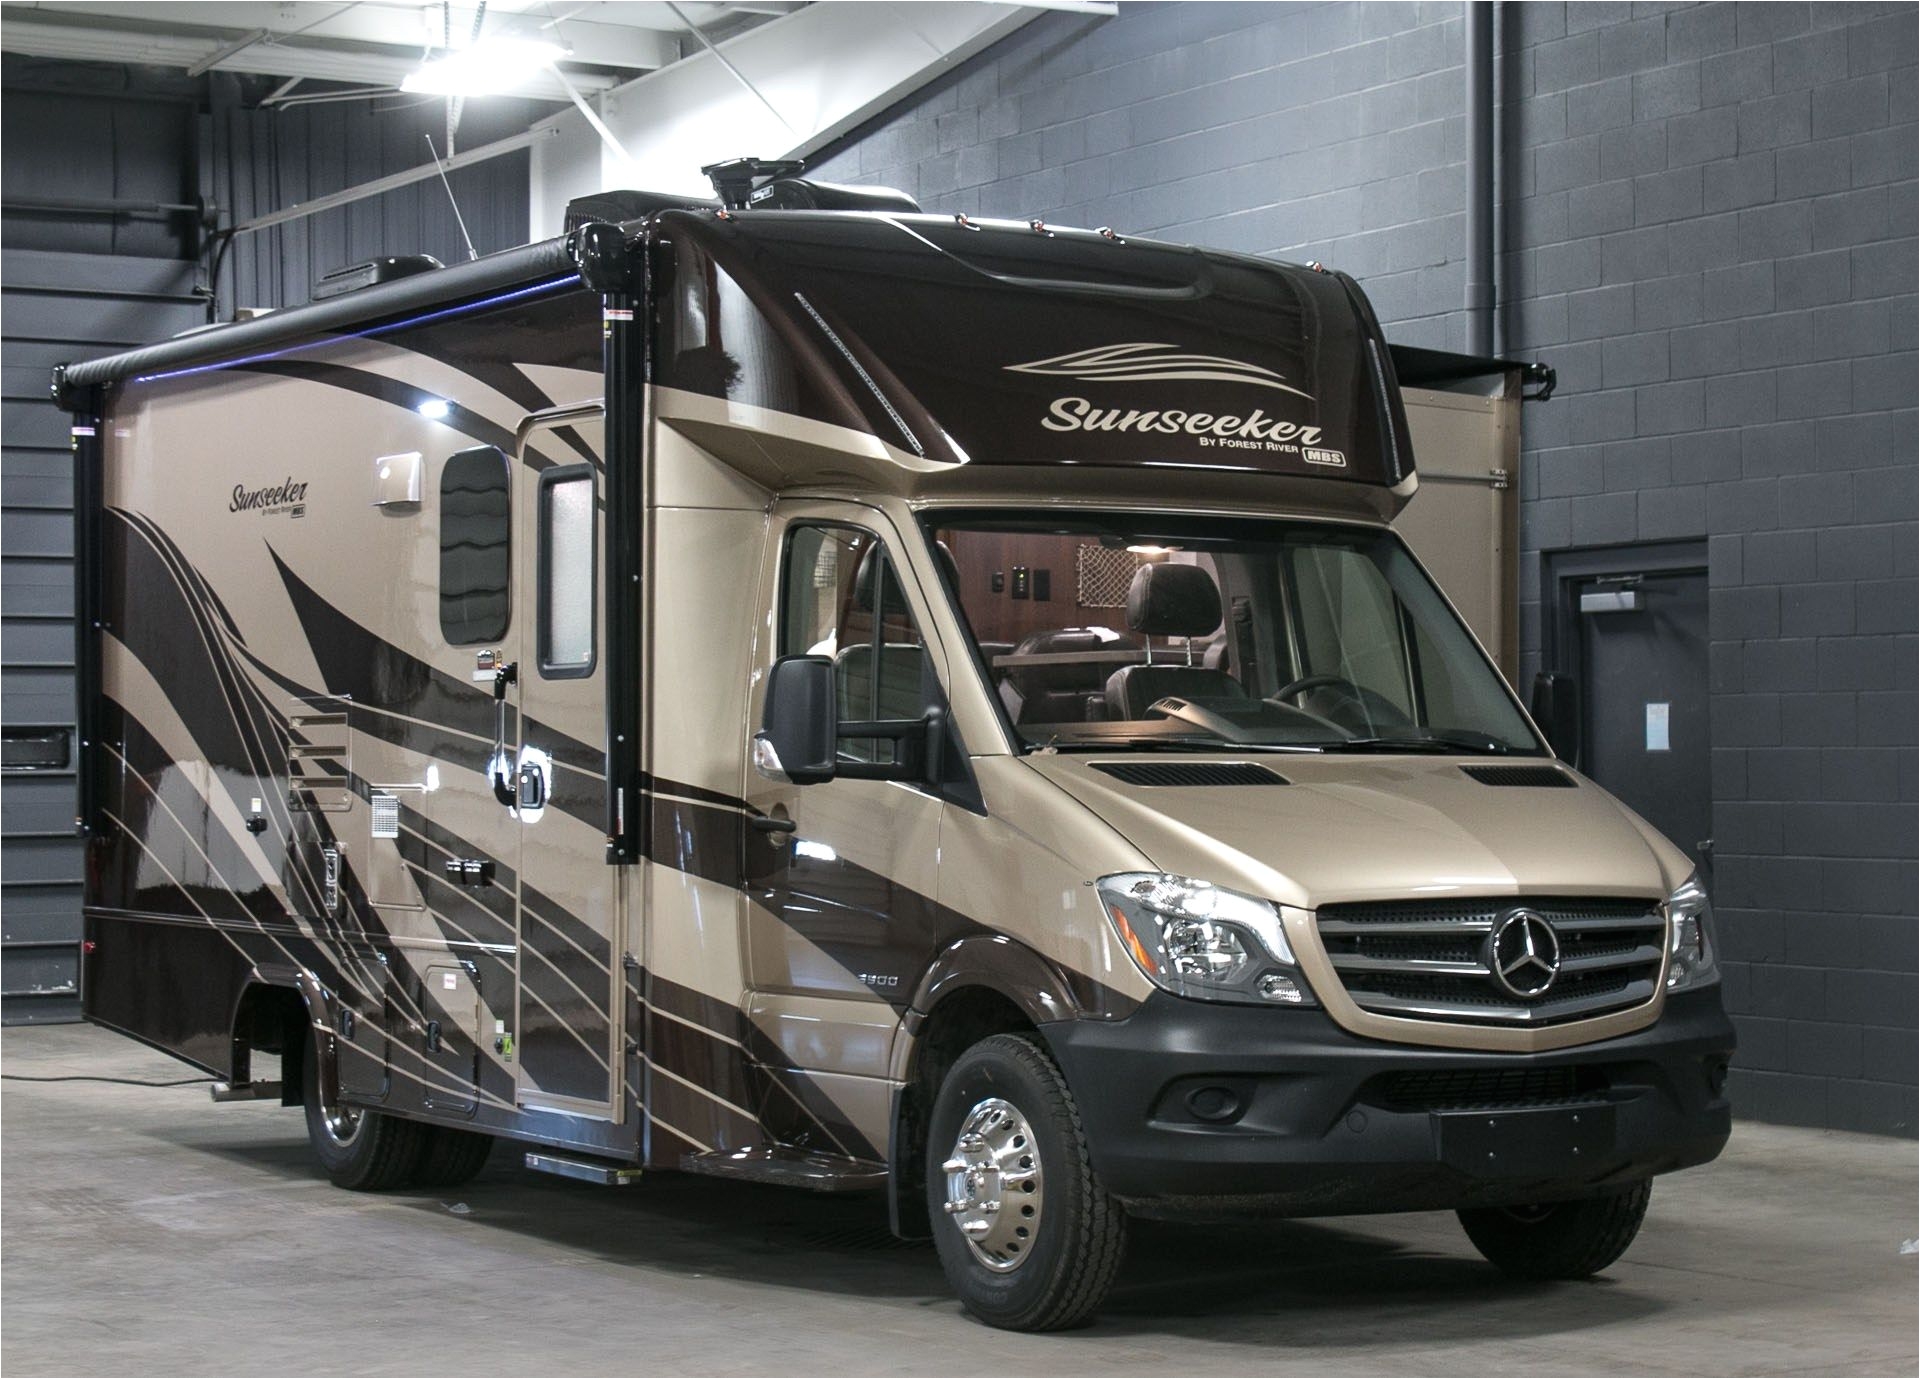 comfortable and smooth motorhome travel 2017 forest river sunseeker mbs 2400w this gas powered